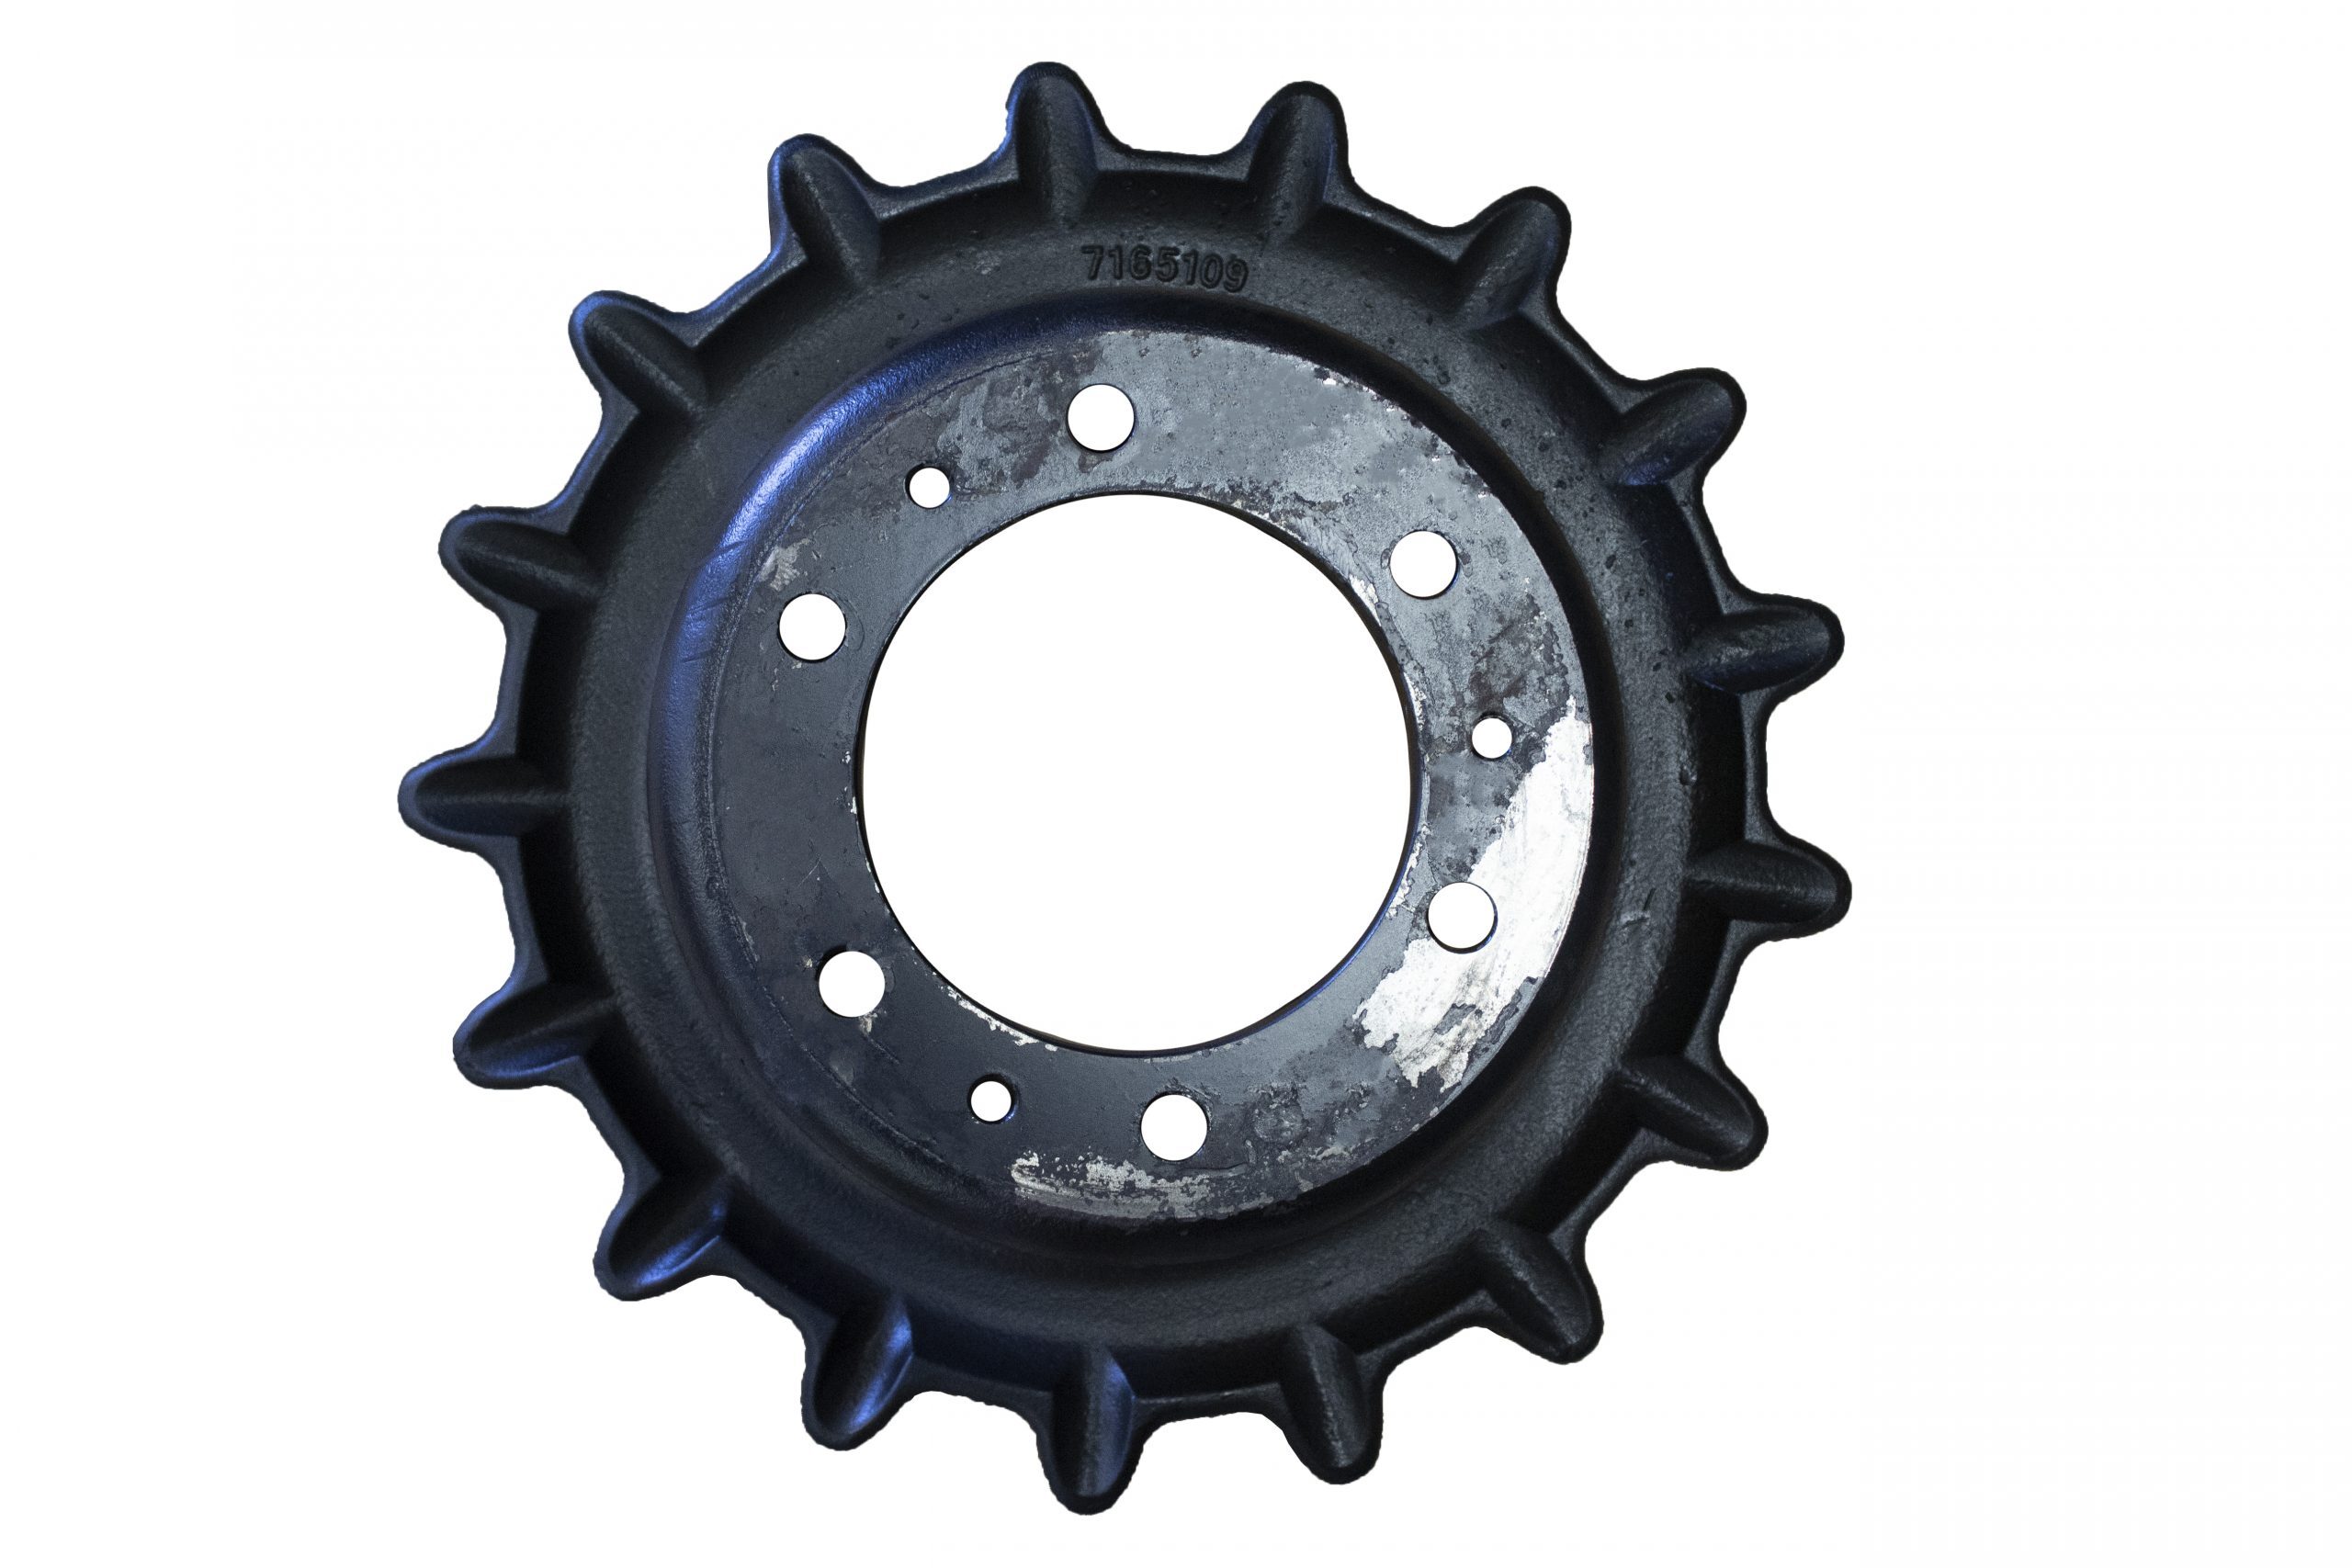 UNDERCARRIAGE SPROCKET 6 HOLE FOR BOBCAT T750 SN AT5T11001 AND ABOVE